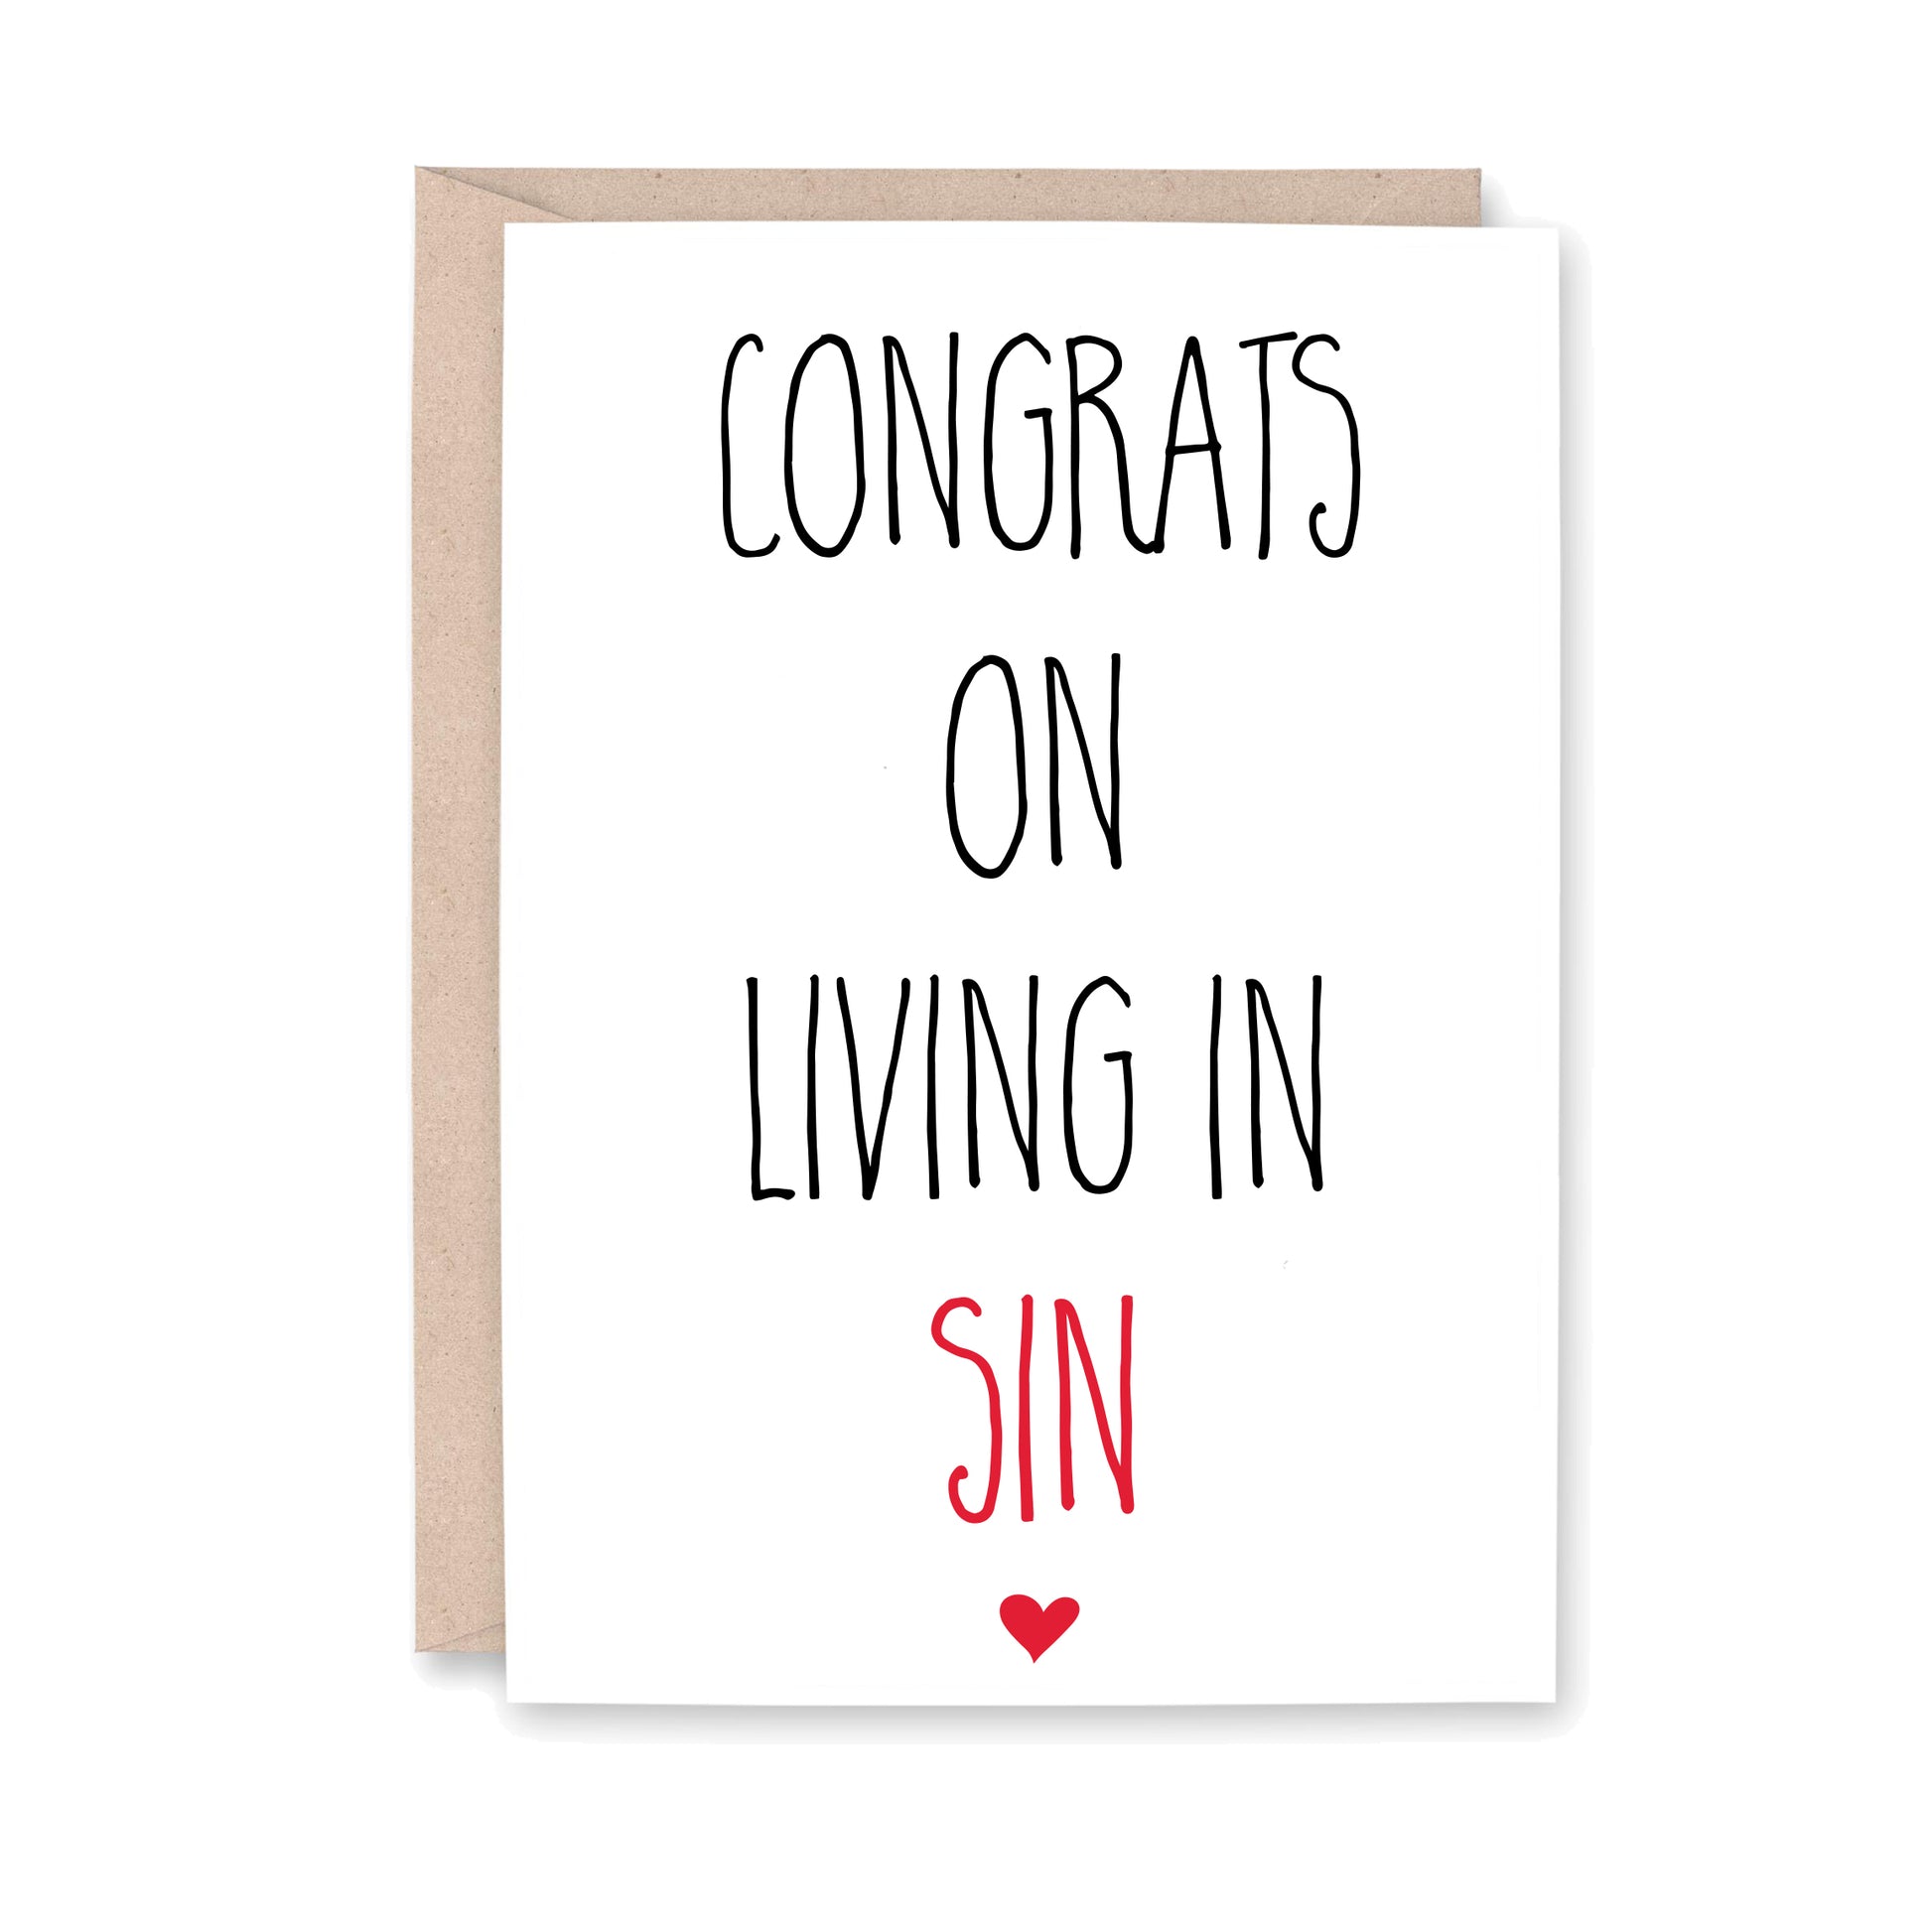 Congrats on living in sin